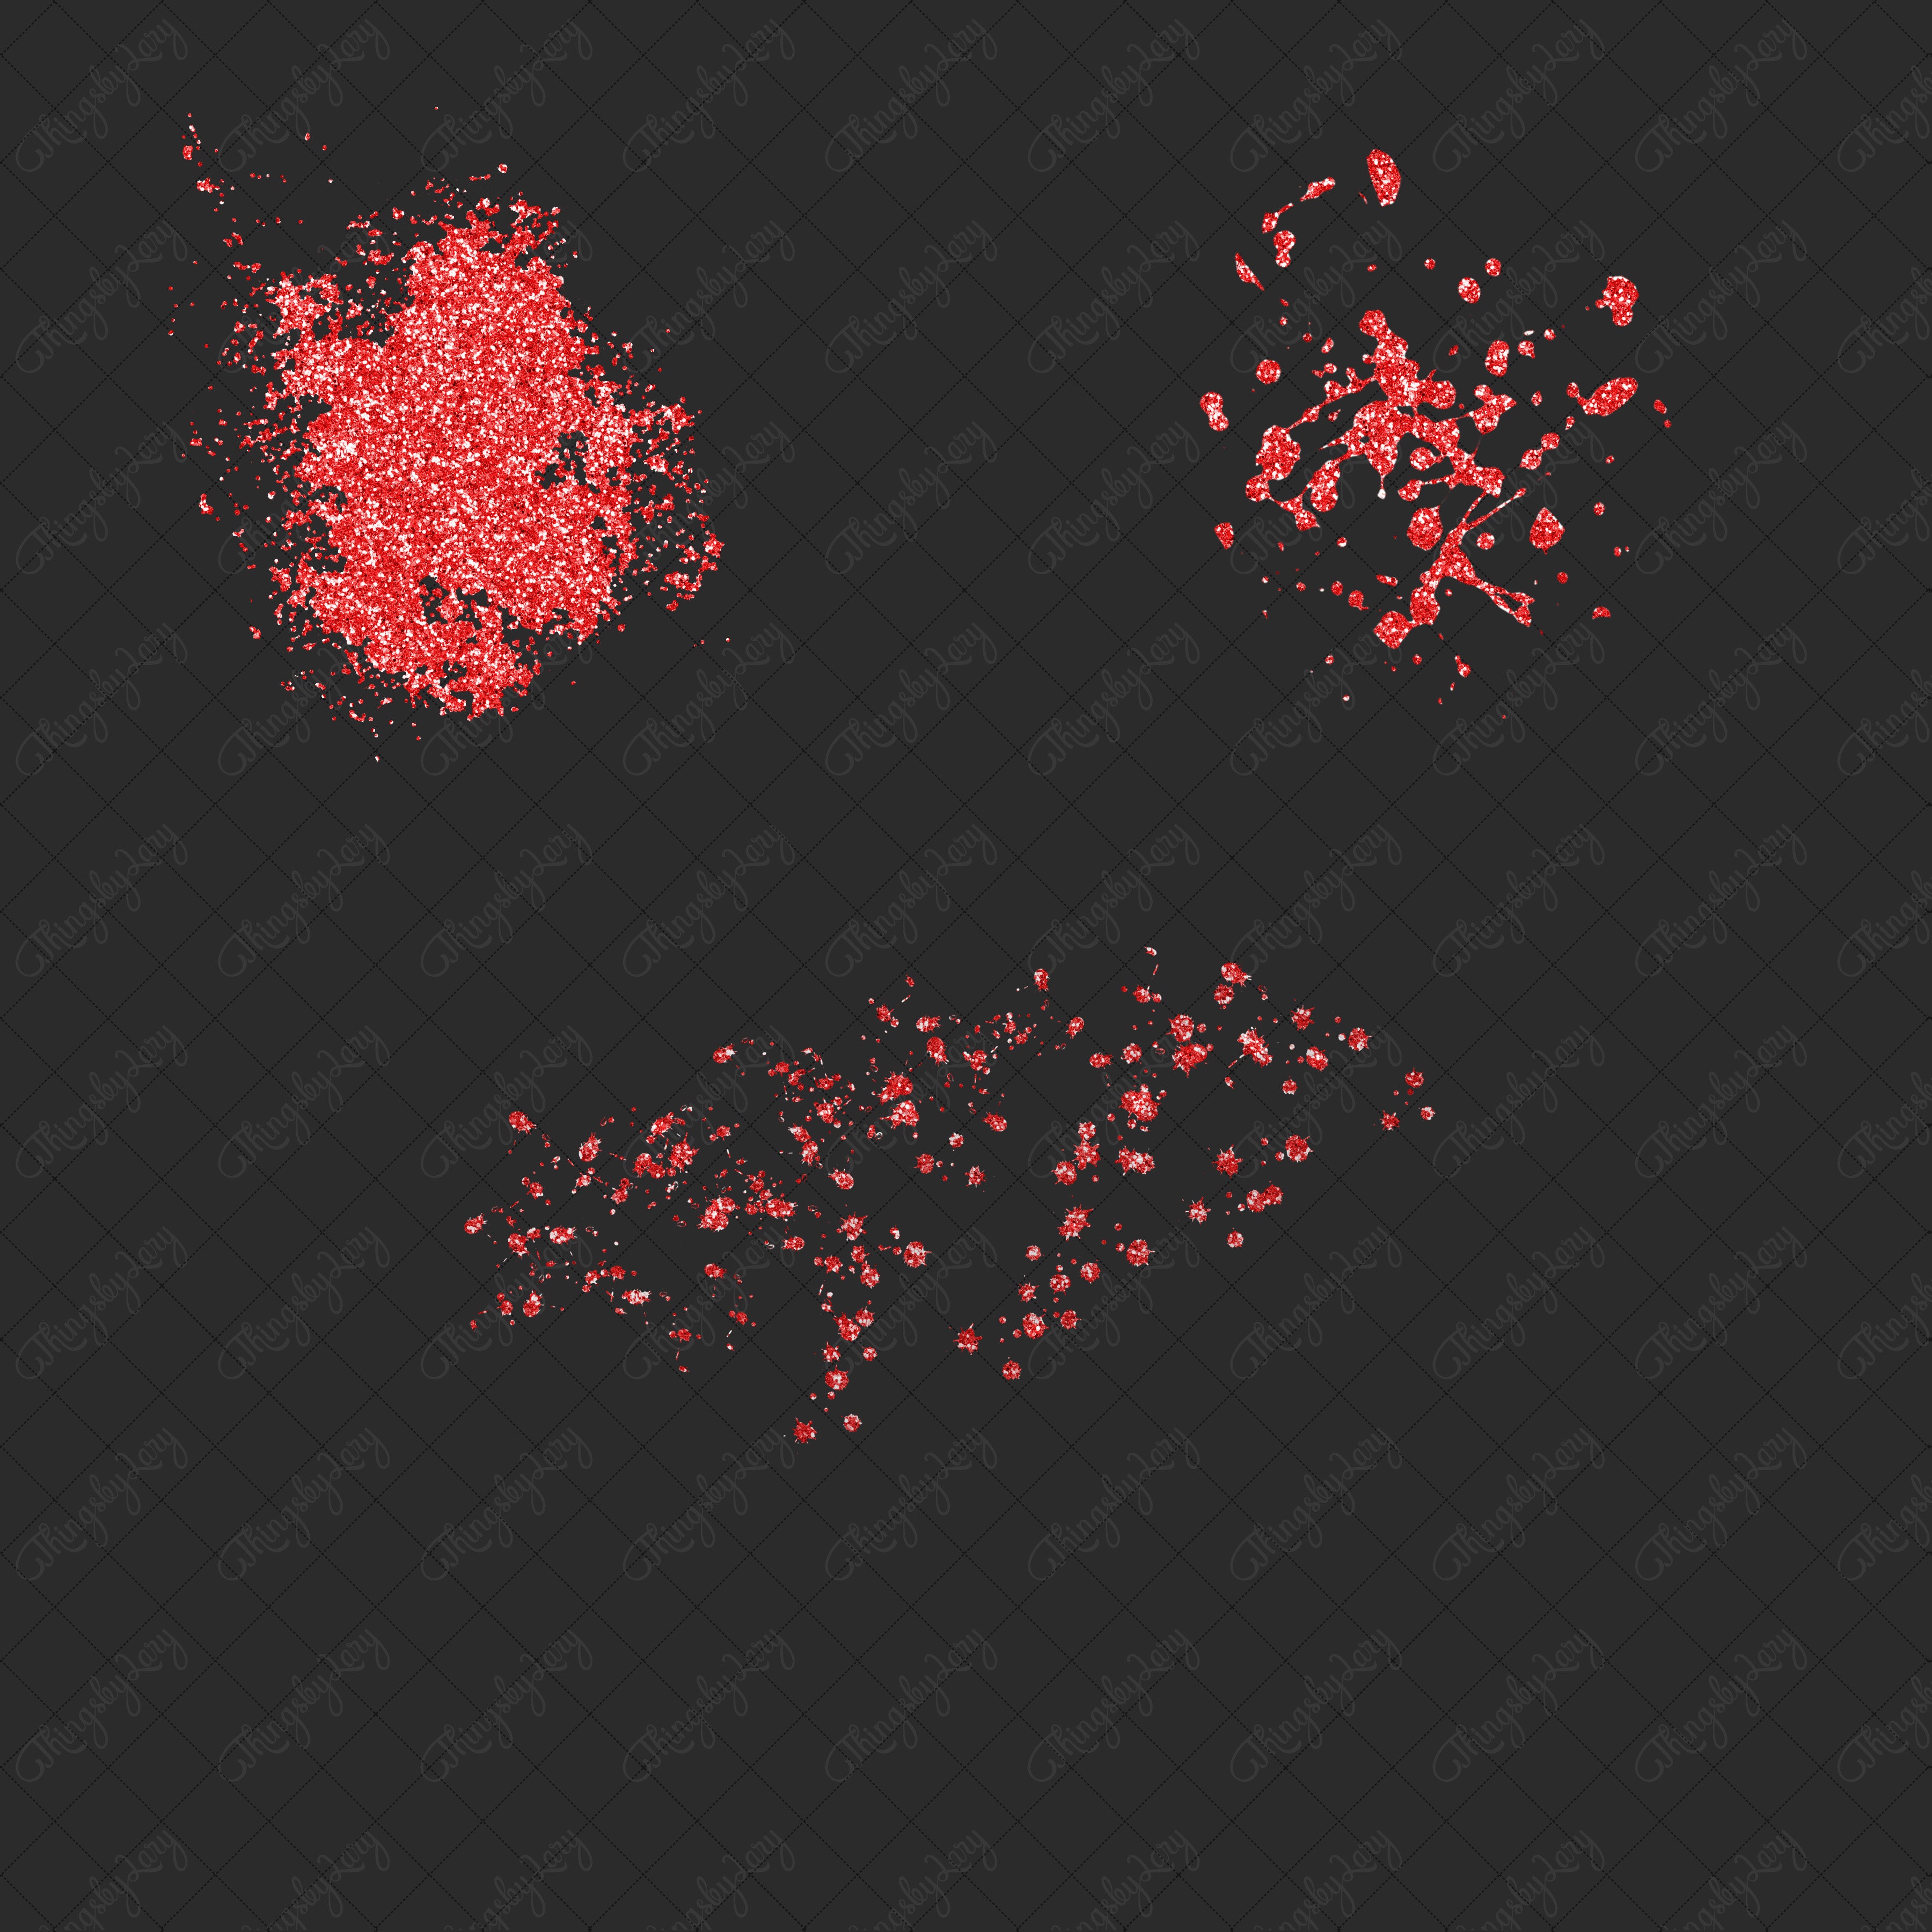 70 Red Glitter Particles Set PNG Overlay Images